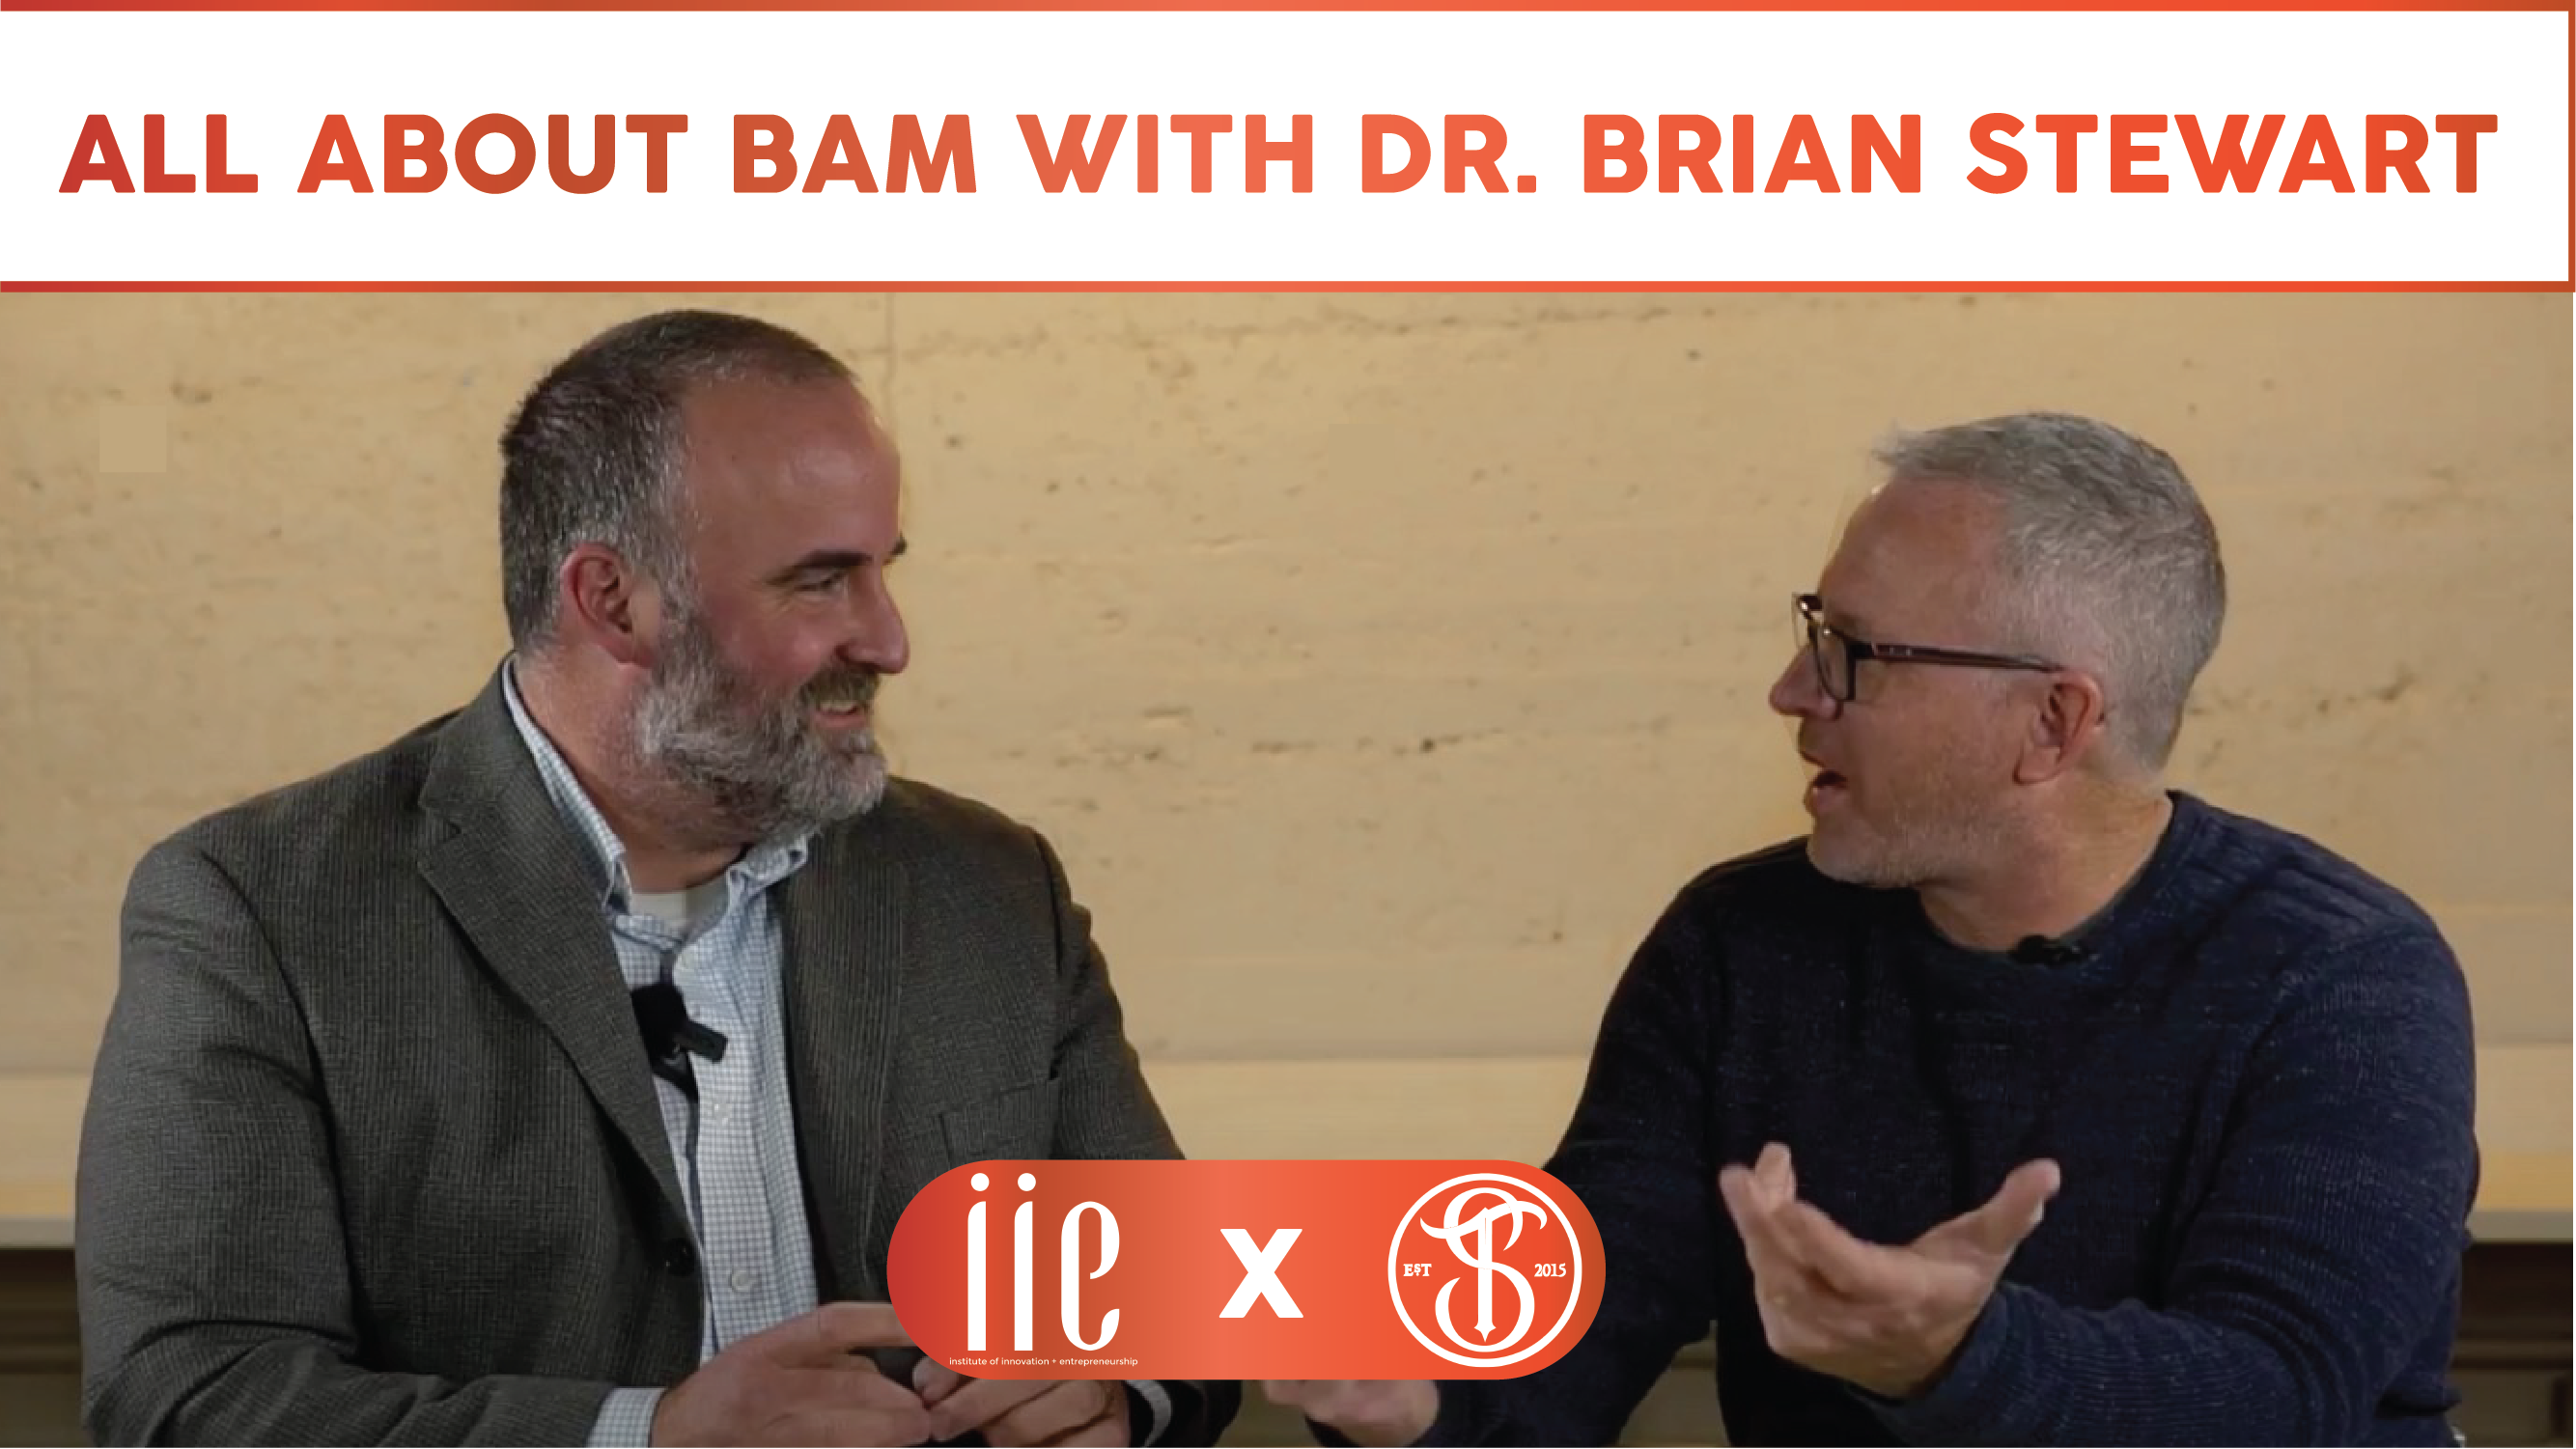 VIDEO: All about BAM ft. Dr. Brian Stewart